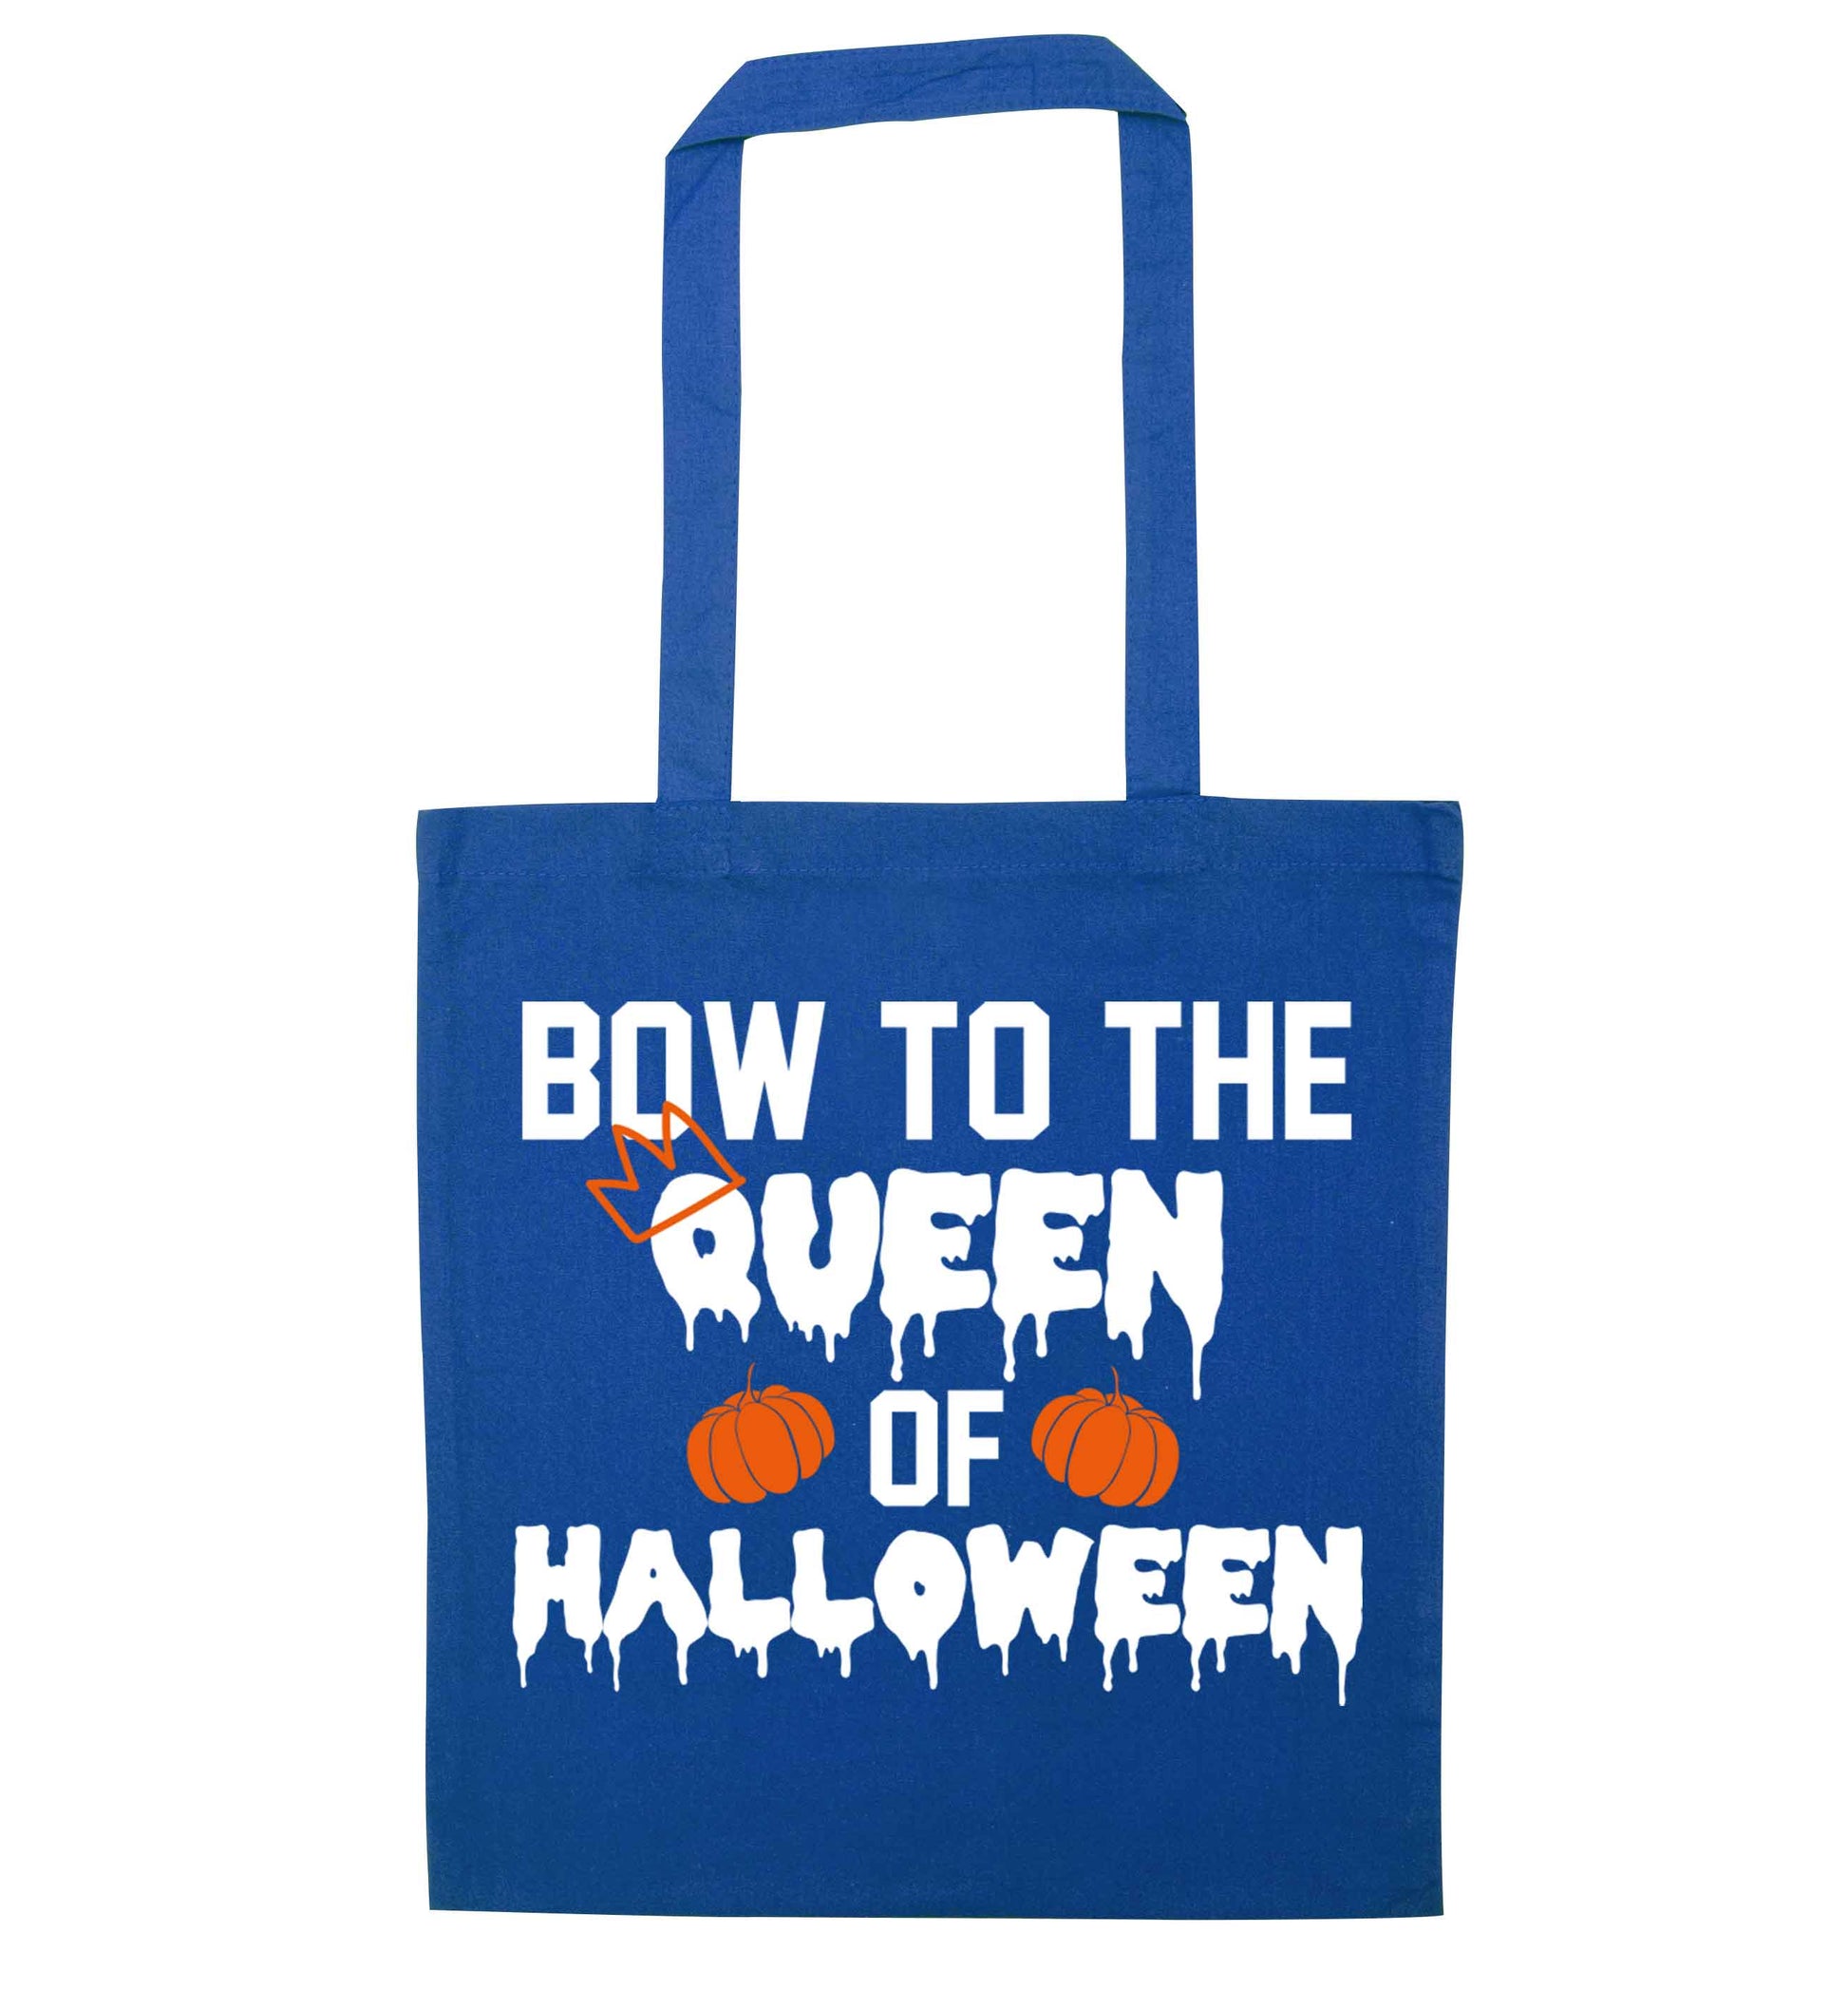 Bow to the Queen of halloween blue tote bag